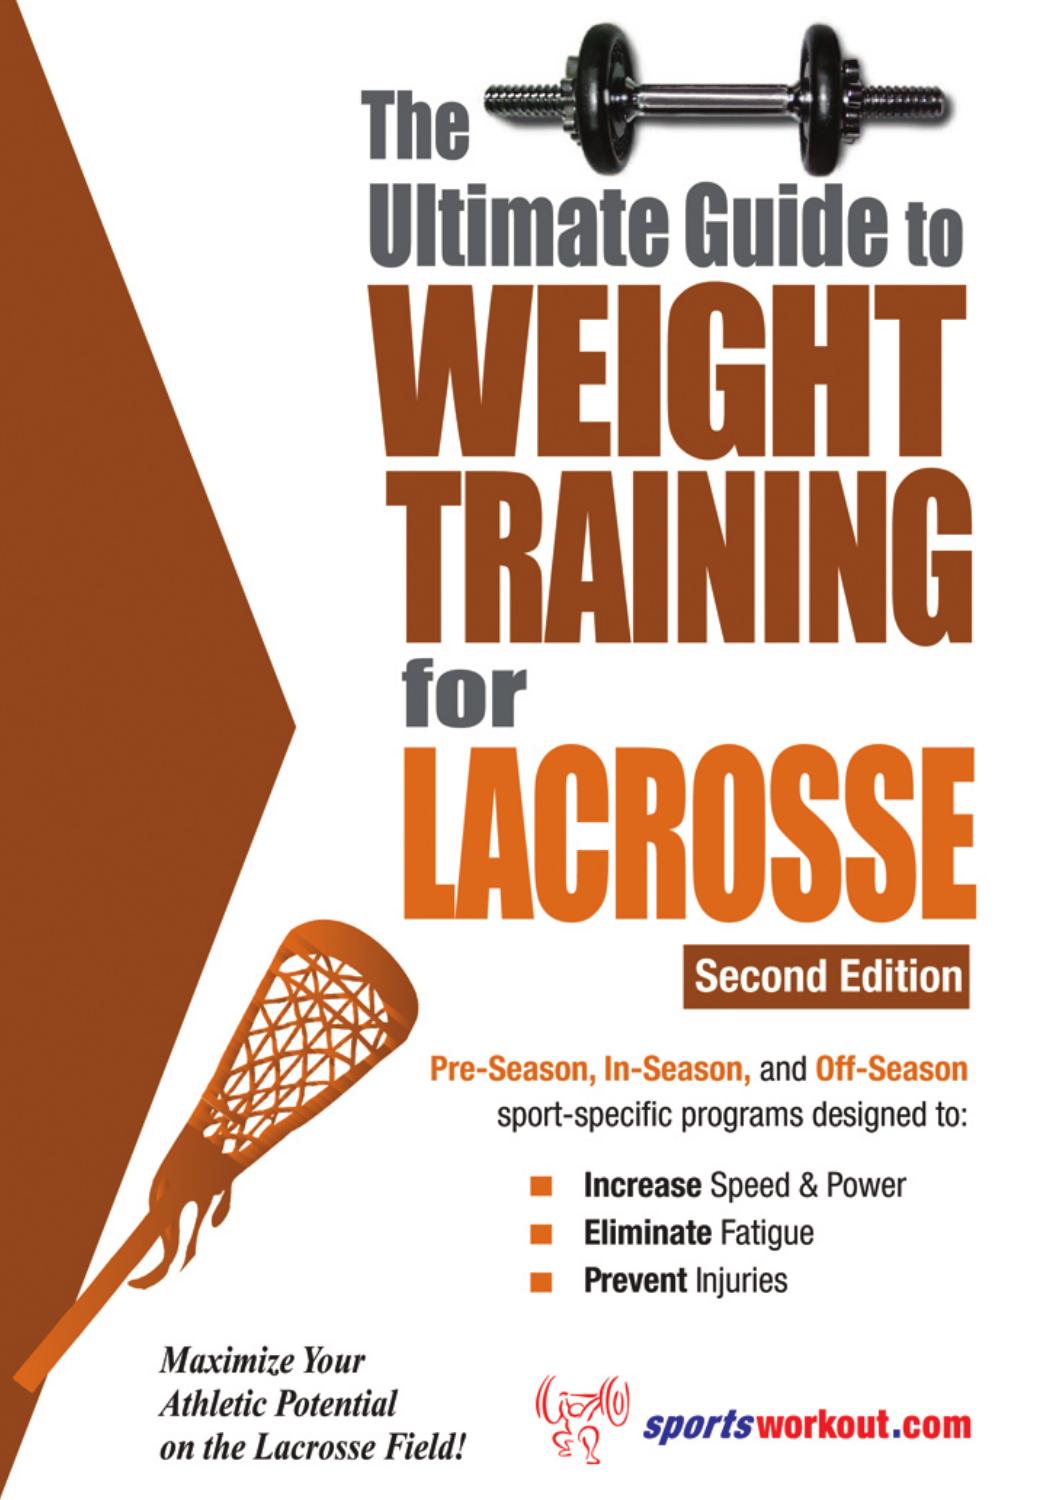 Ultimate Guide to Weight Training for Lacrosse by Rob Price